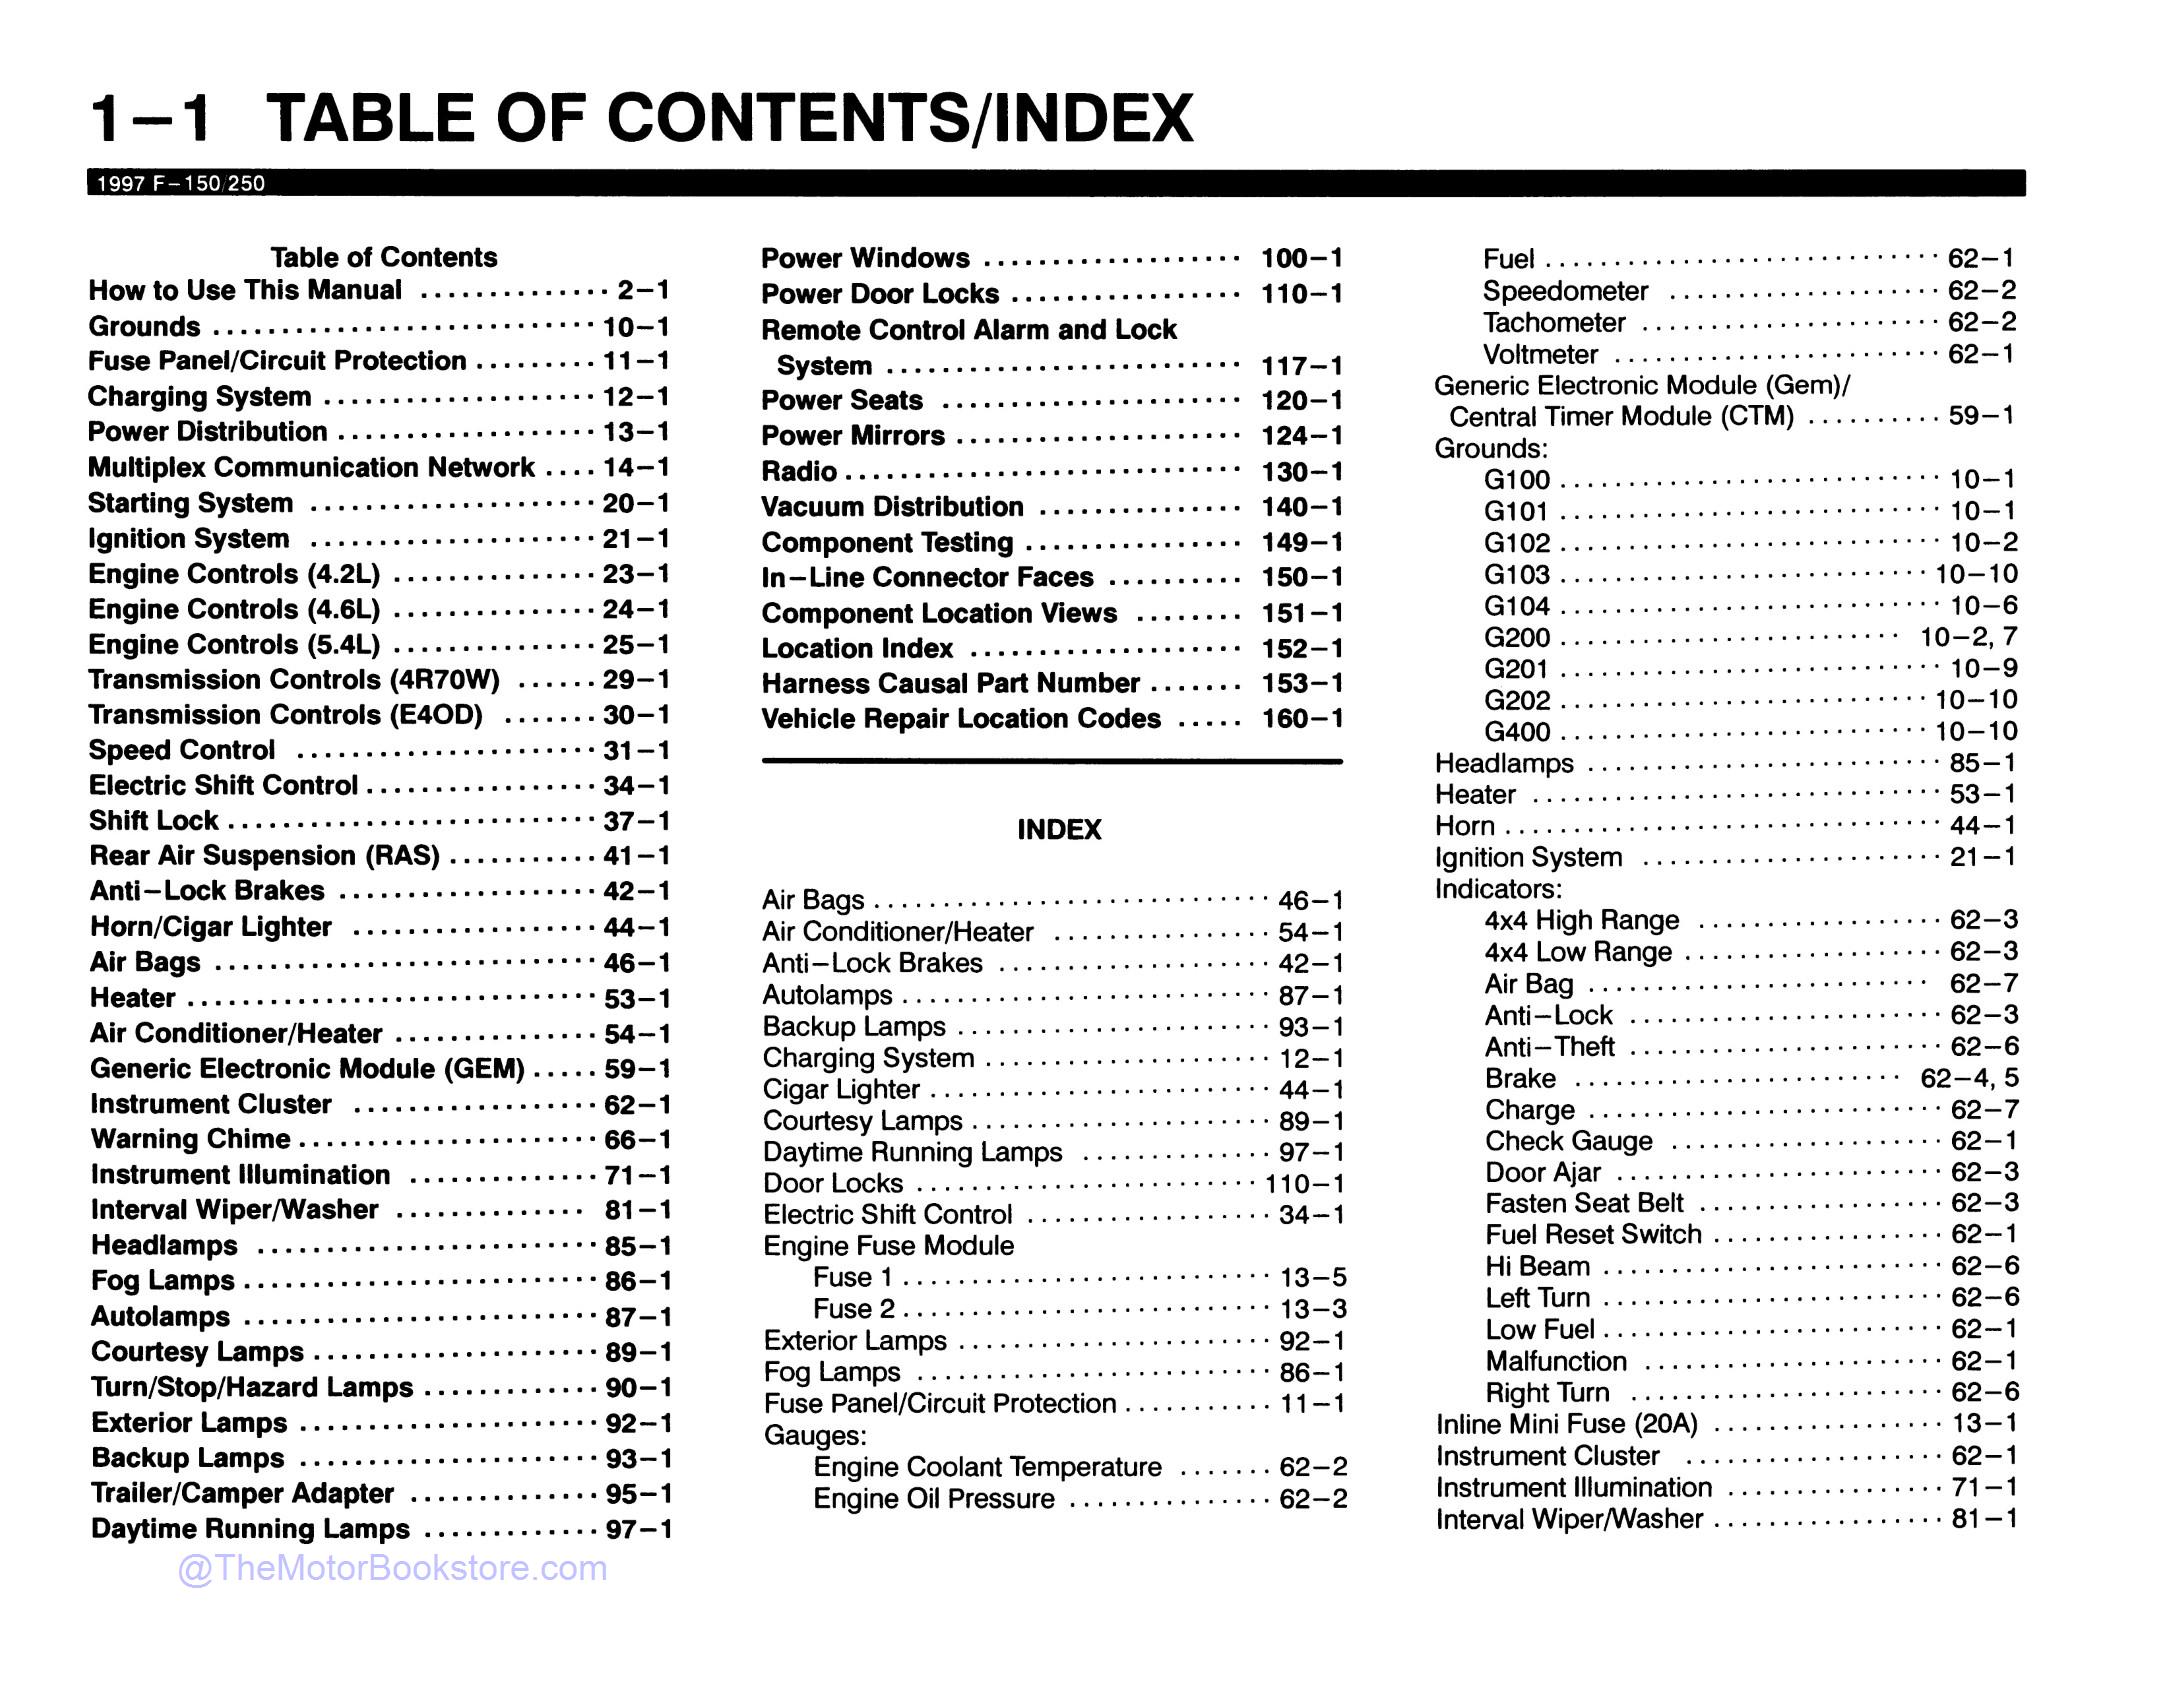 1997 Ford F-150, F-250 Electrical Troubleshooting Manual  - Table of Contents 1